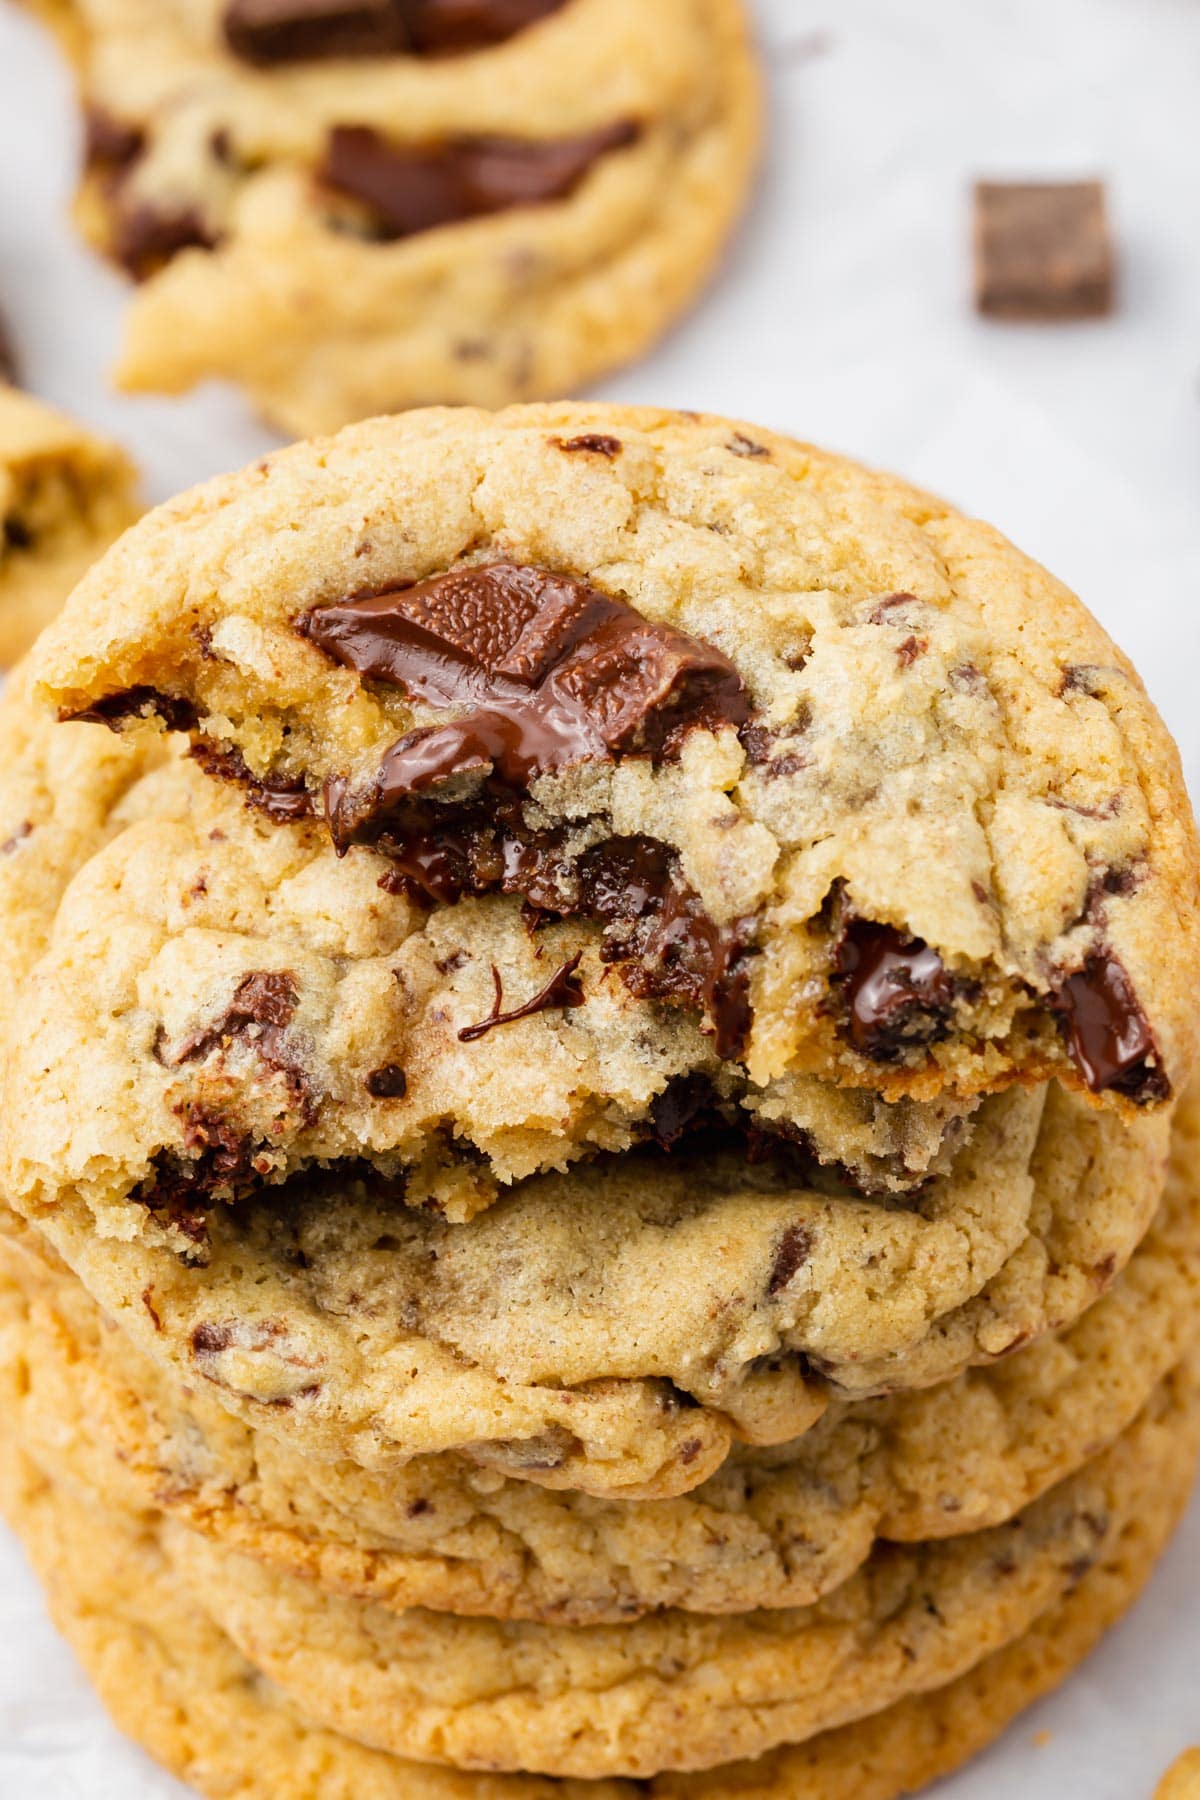 A stack of gluten-free chocolate chip cookies.